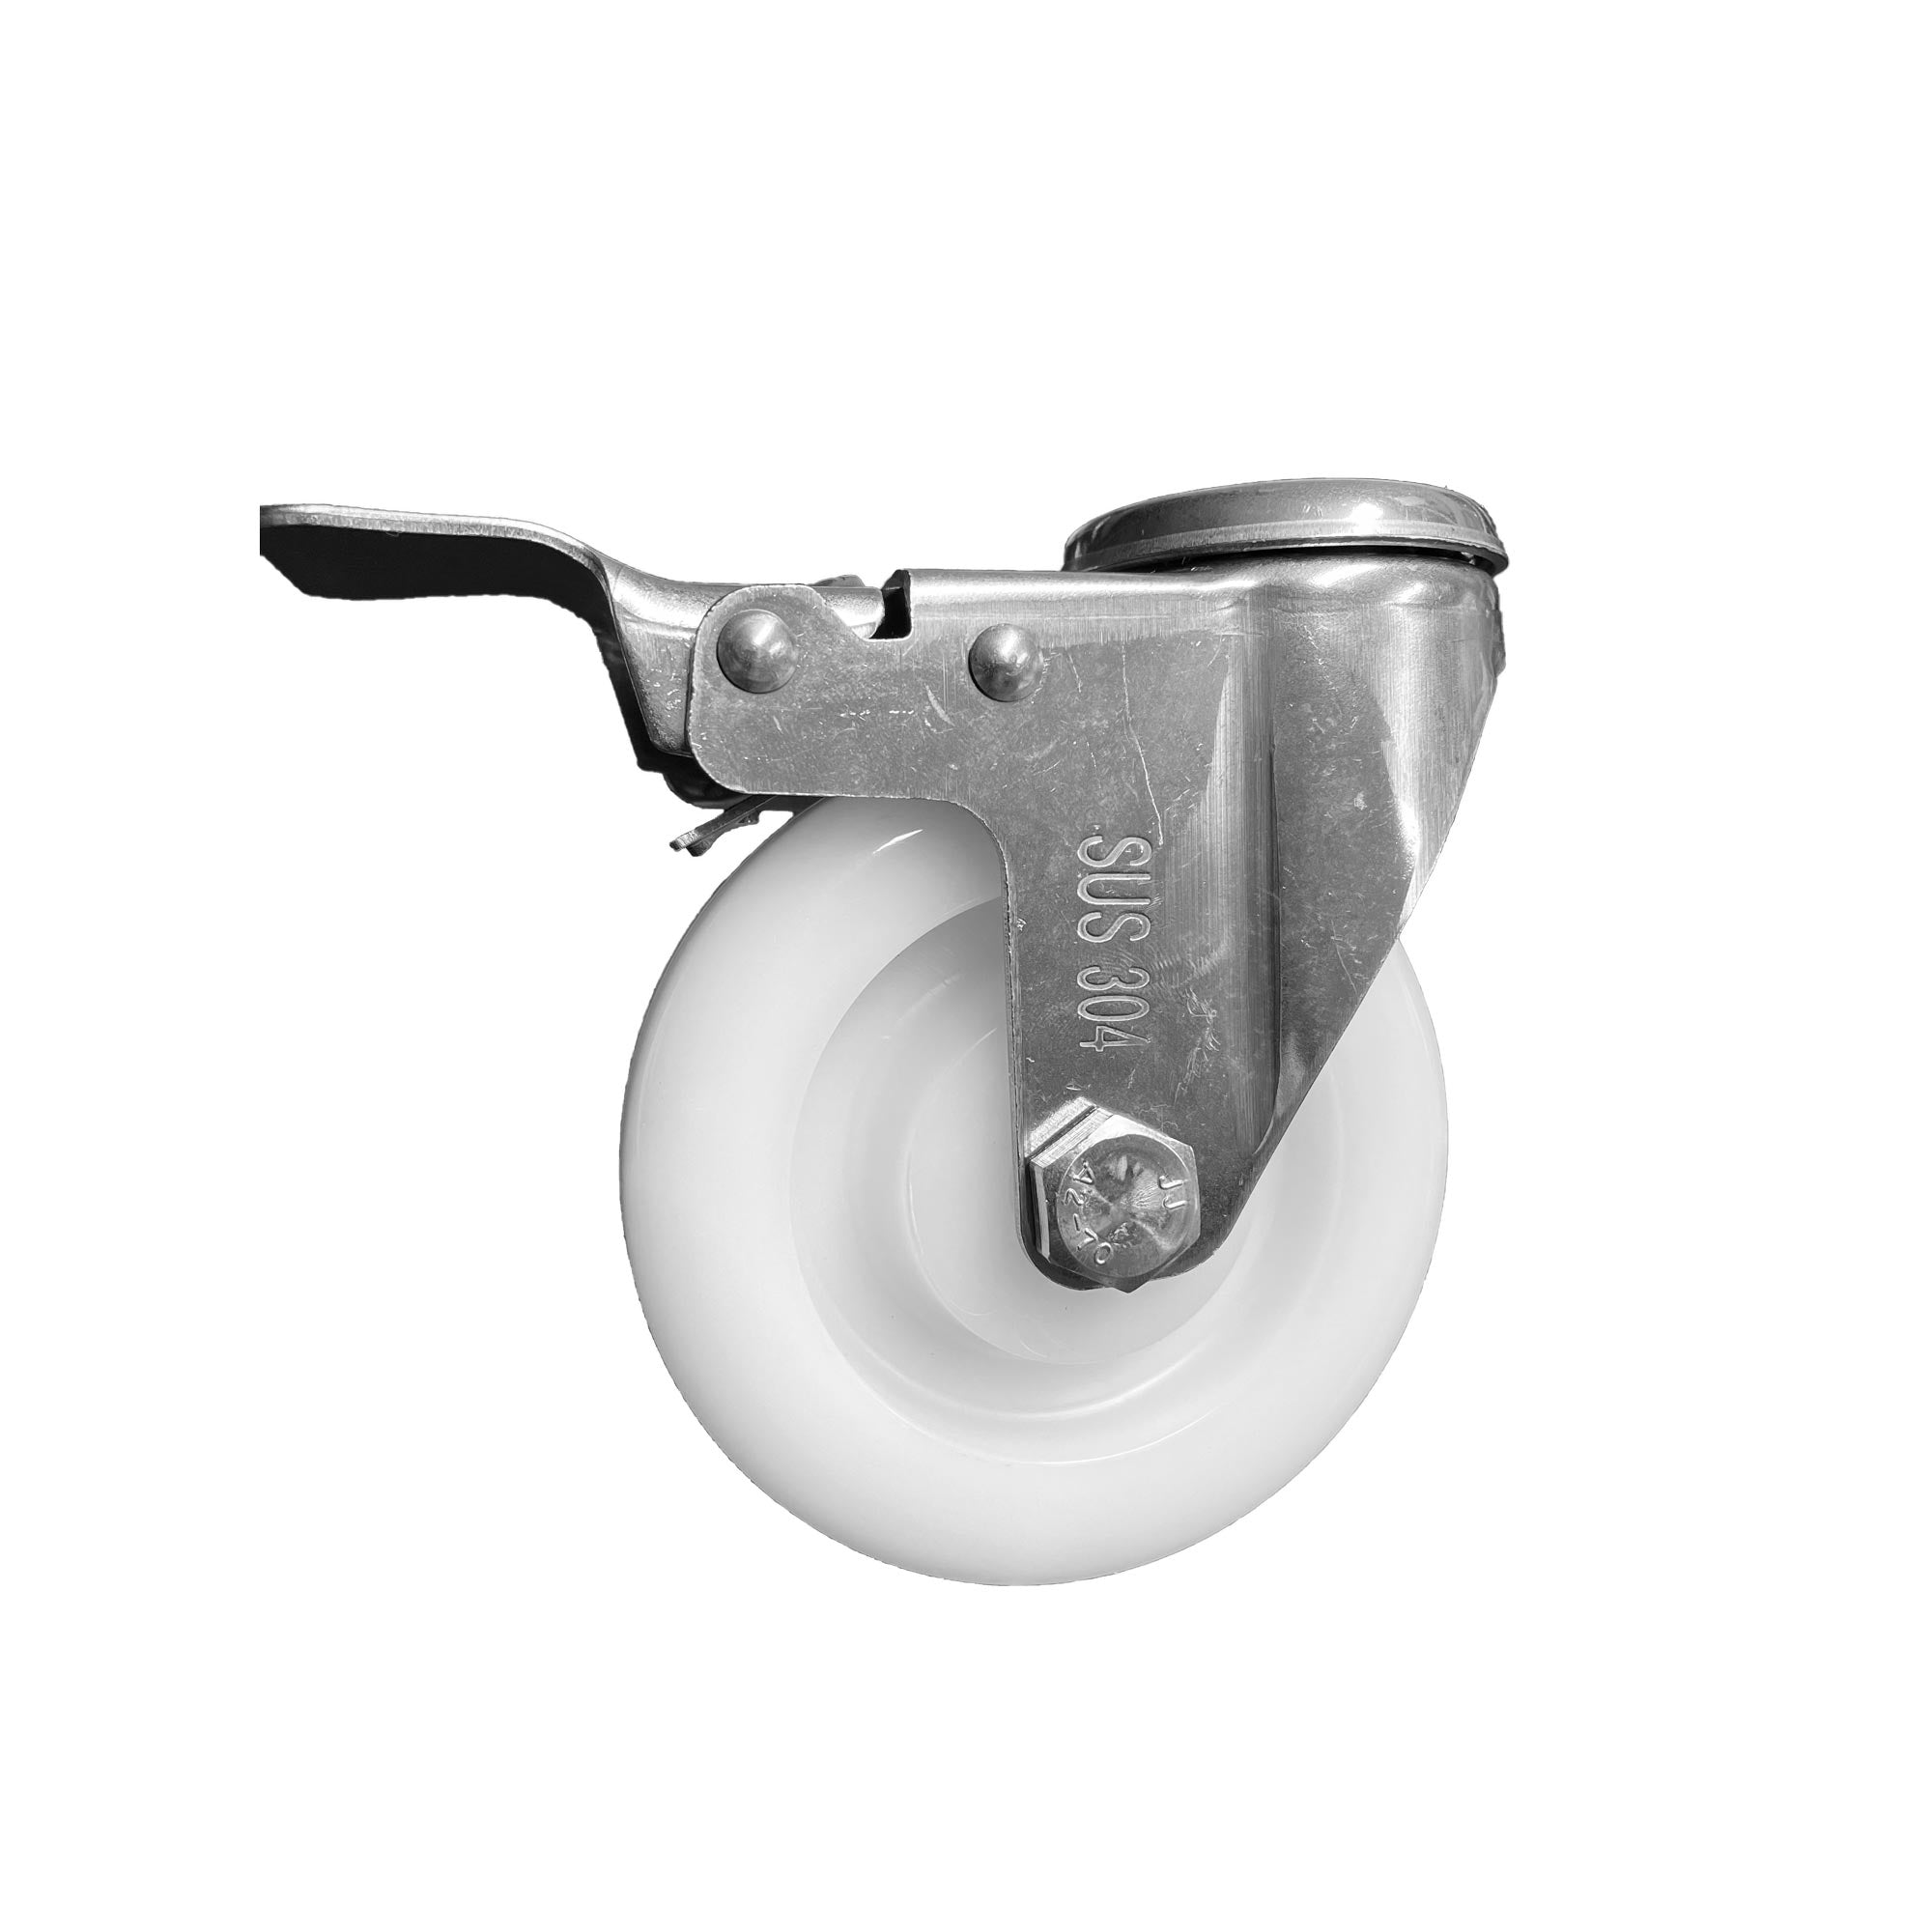 4 Stainless Steel Swivel Caster with Bolt Hole and White Nylon Wheel –  Atesco Industrial Hygiene